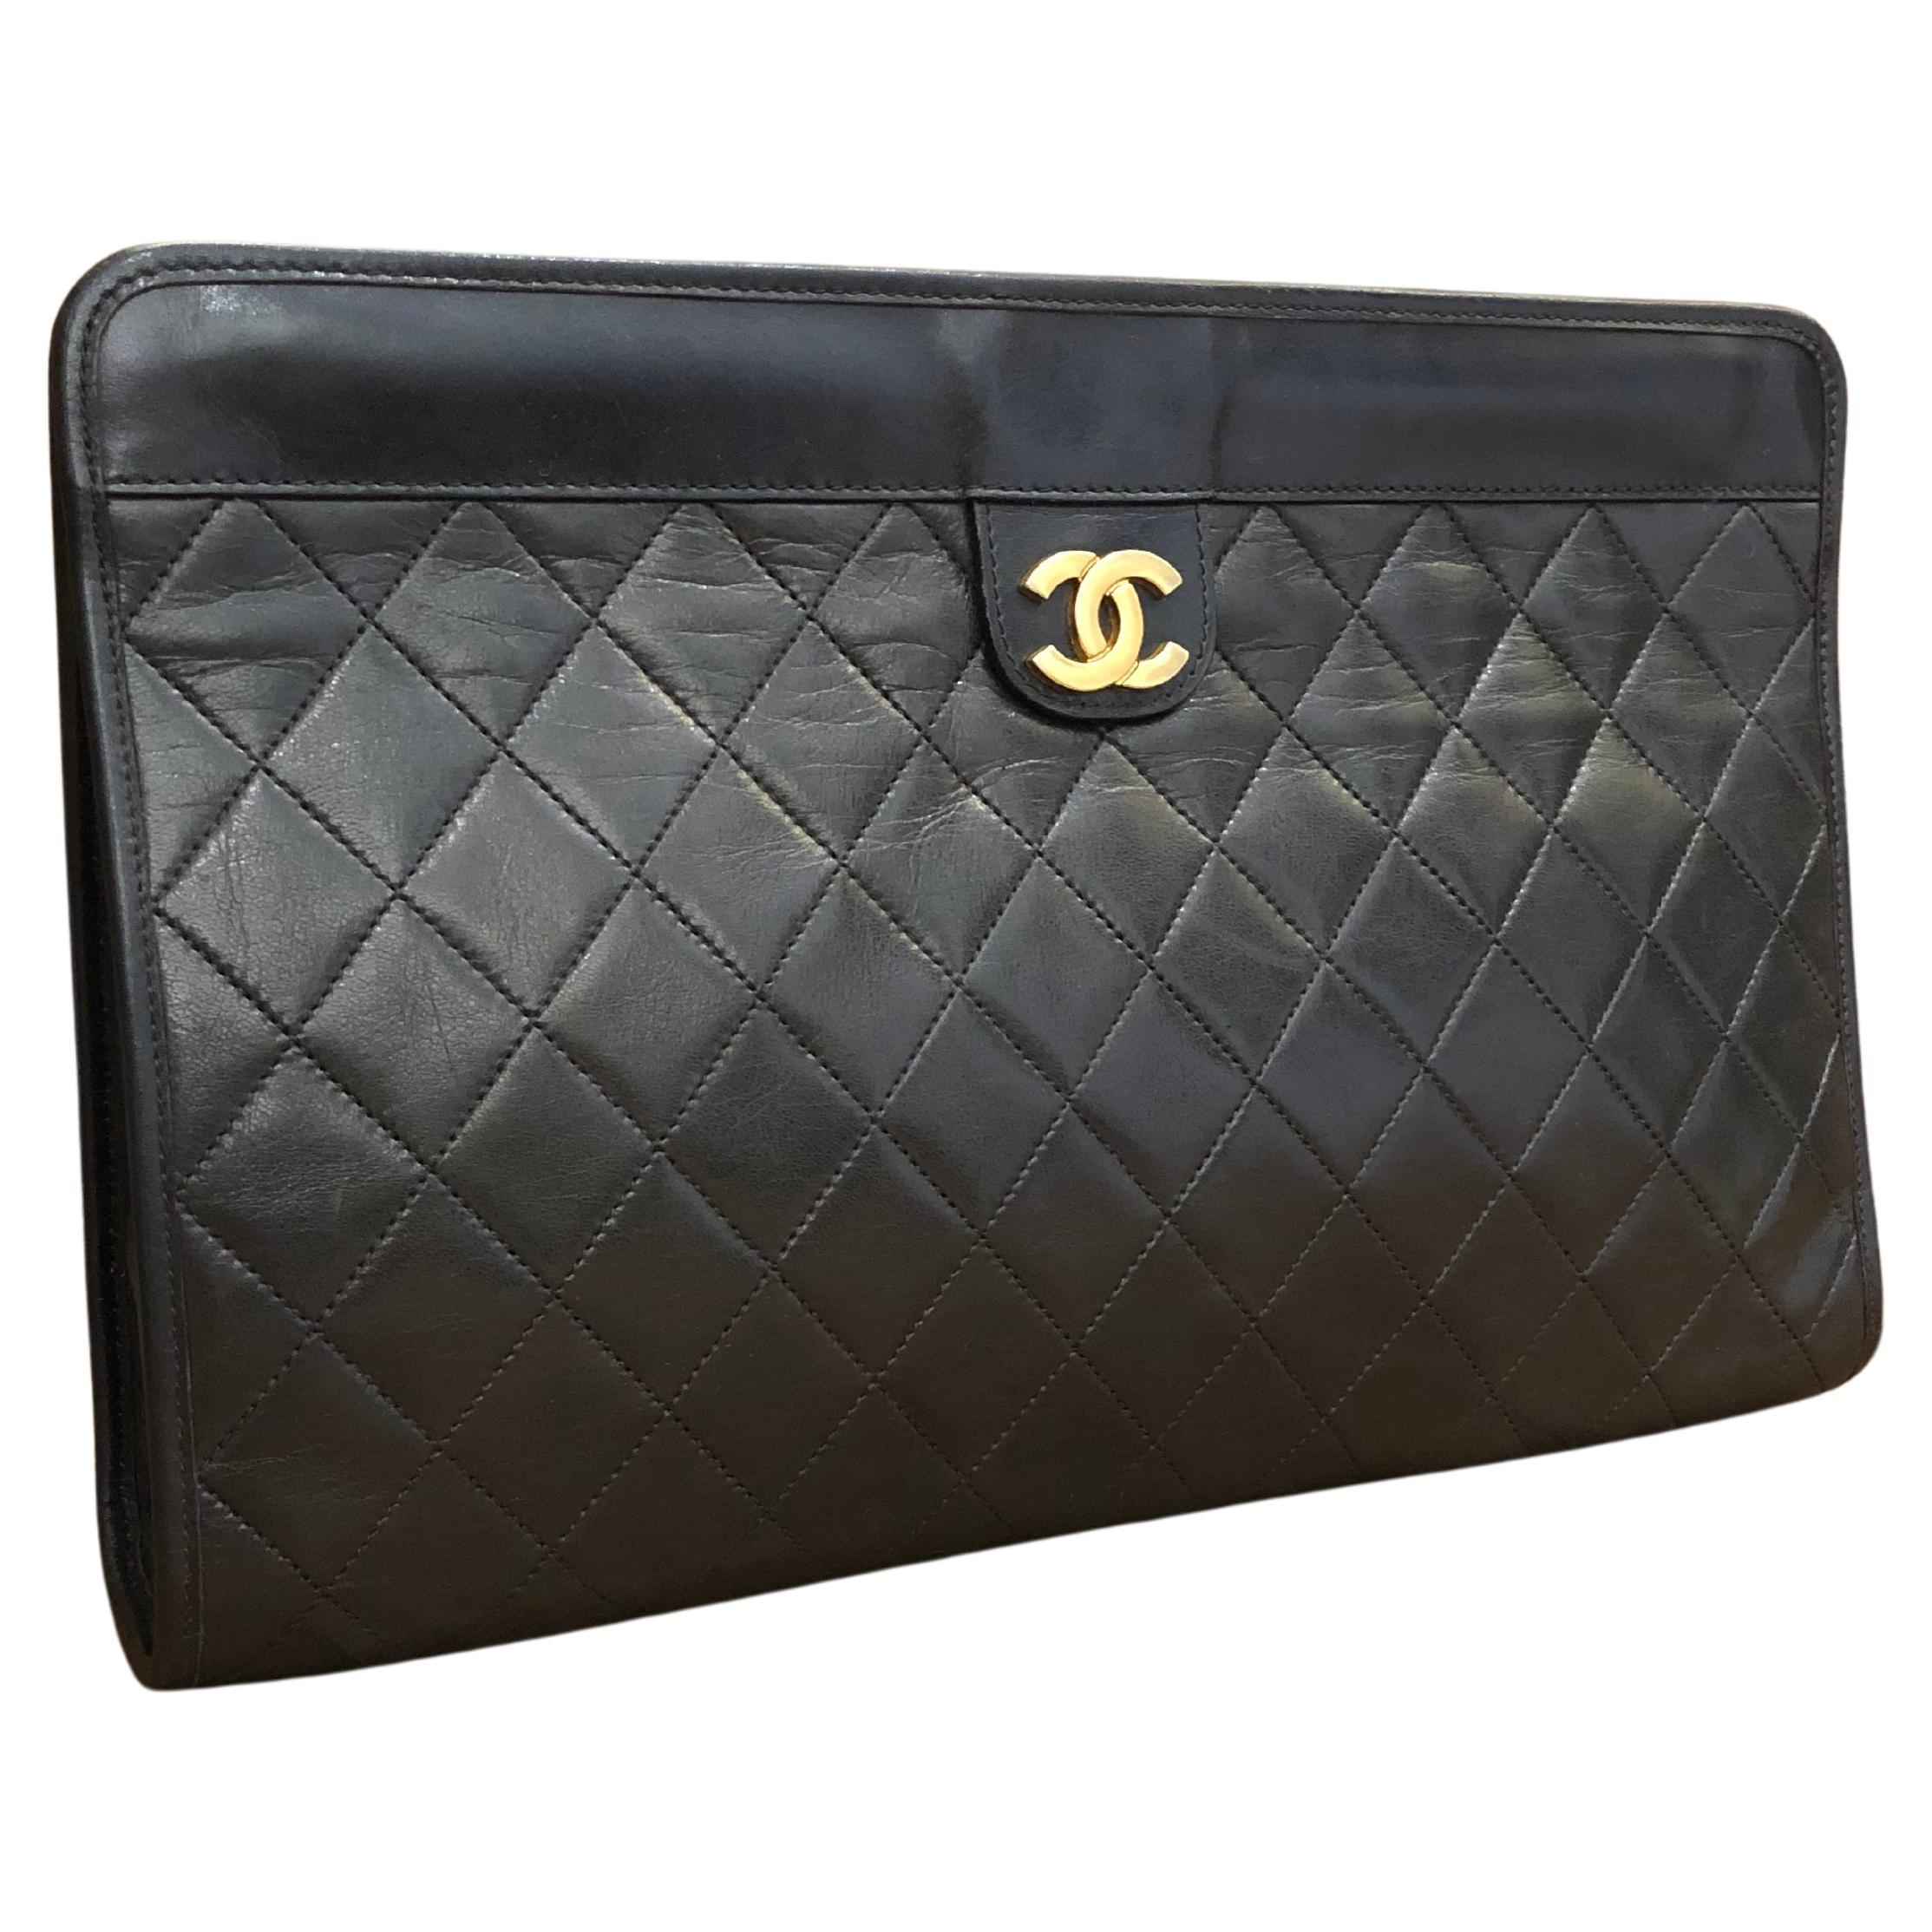 Vintage CHANEL Two-Toned Diamond Quilted Lambskin Leather Clutch Bag Large